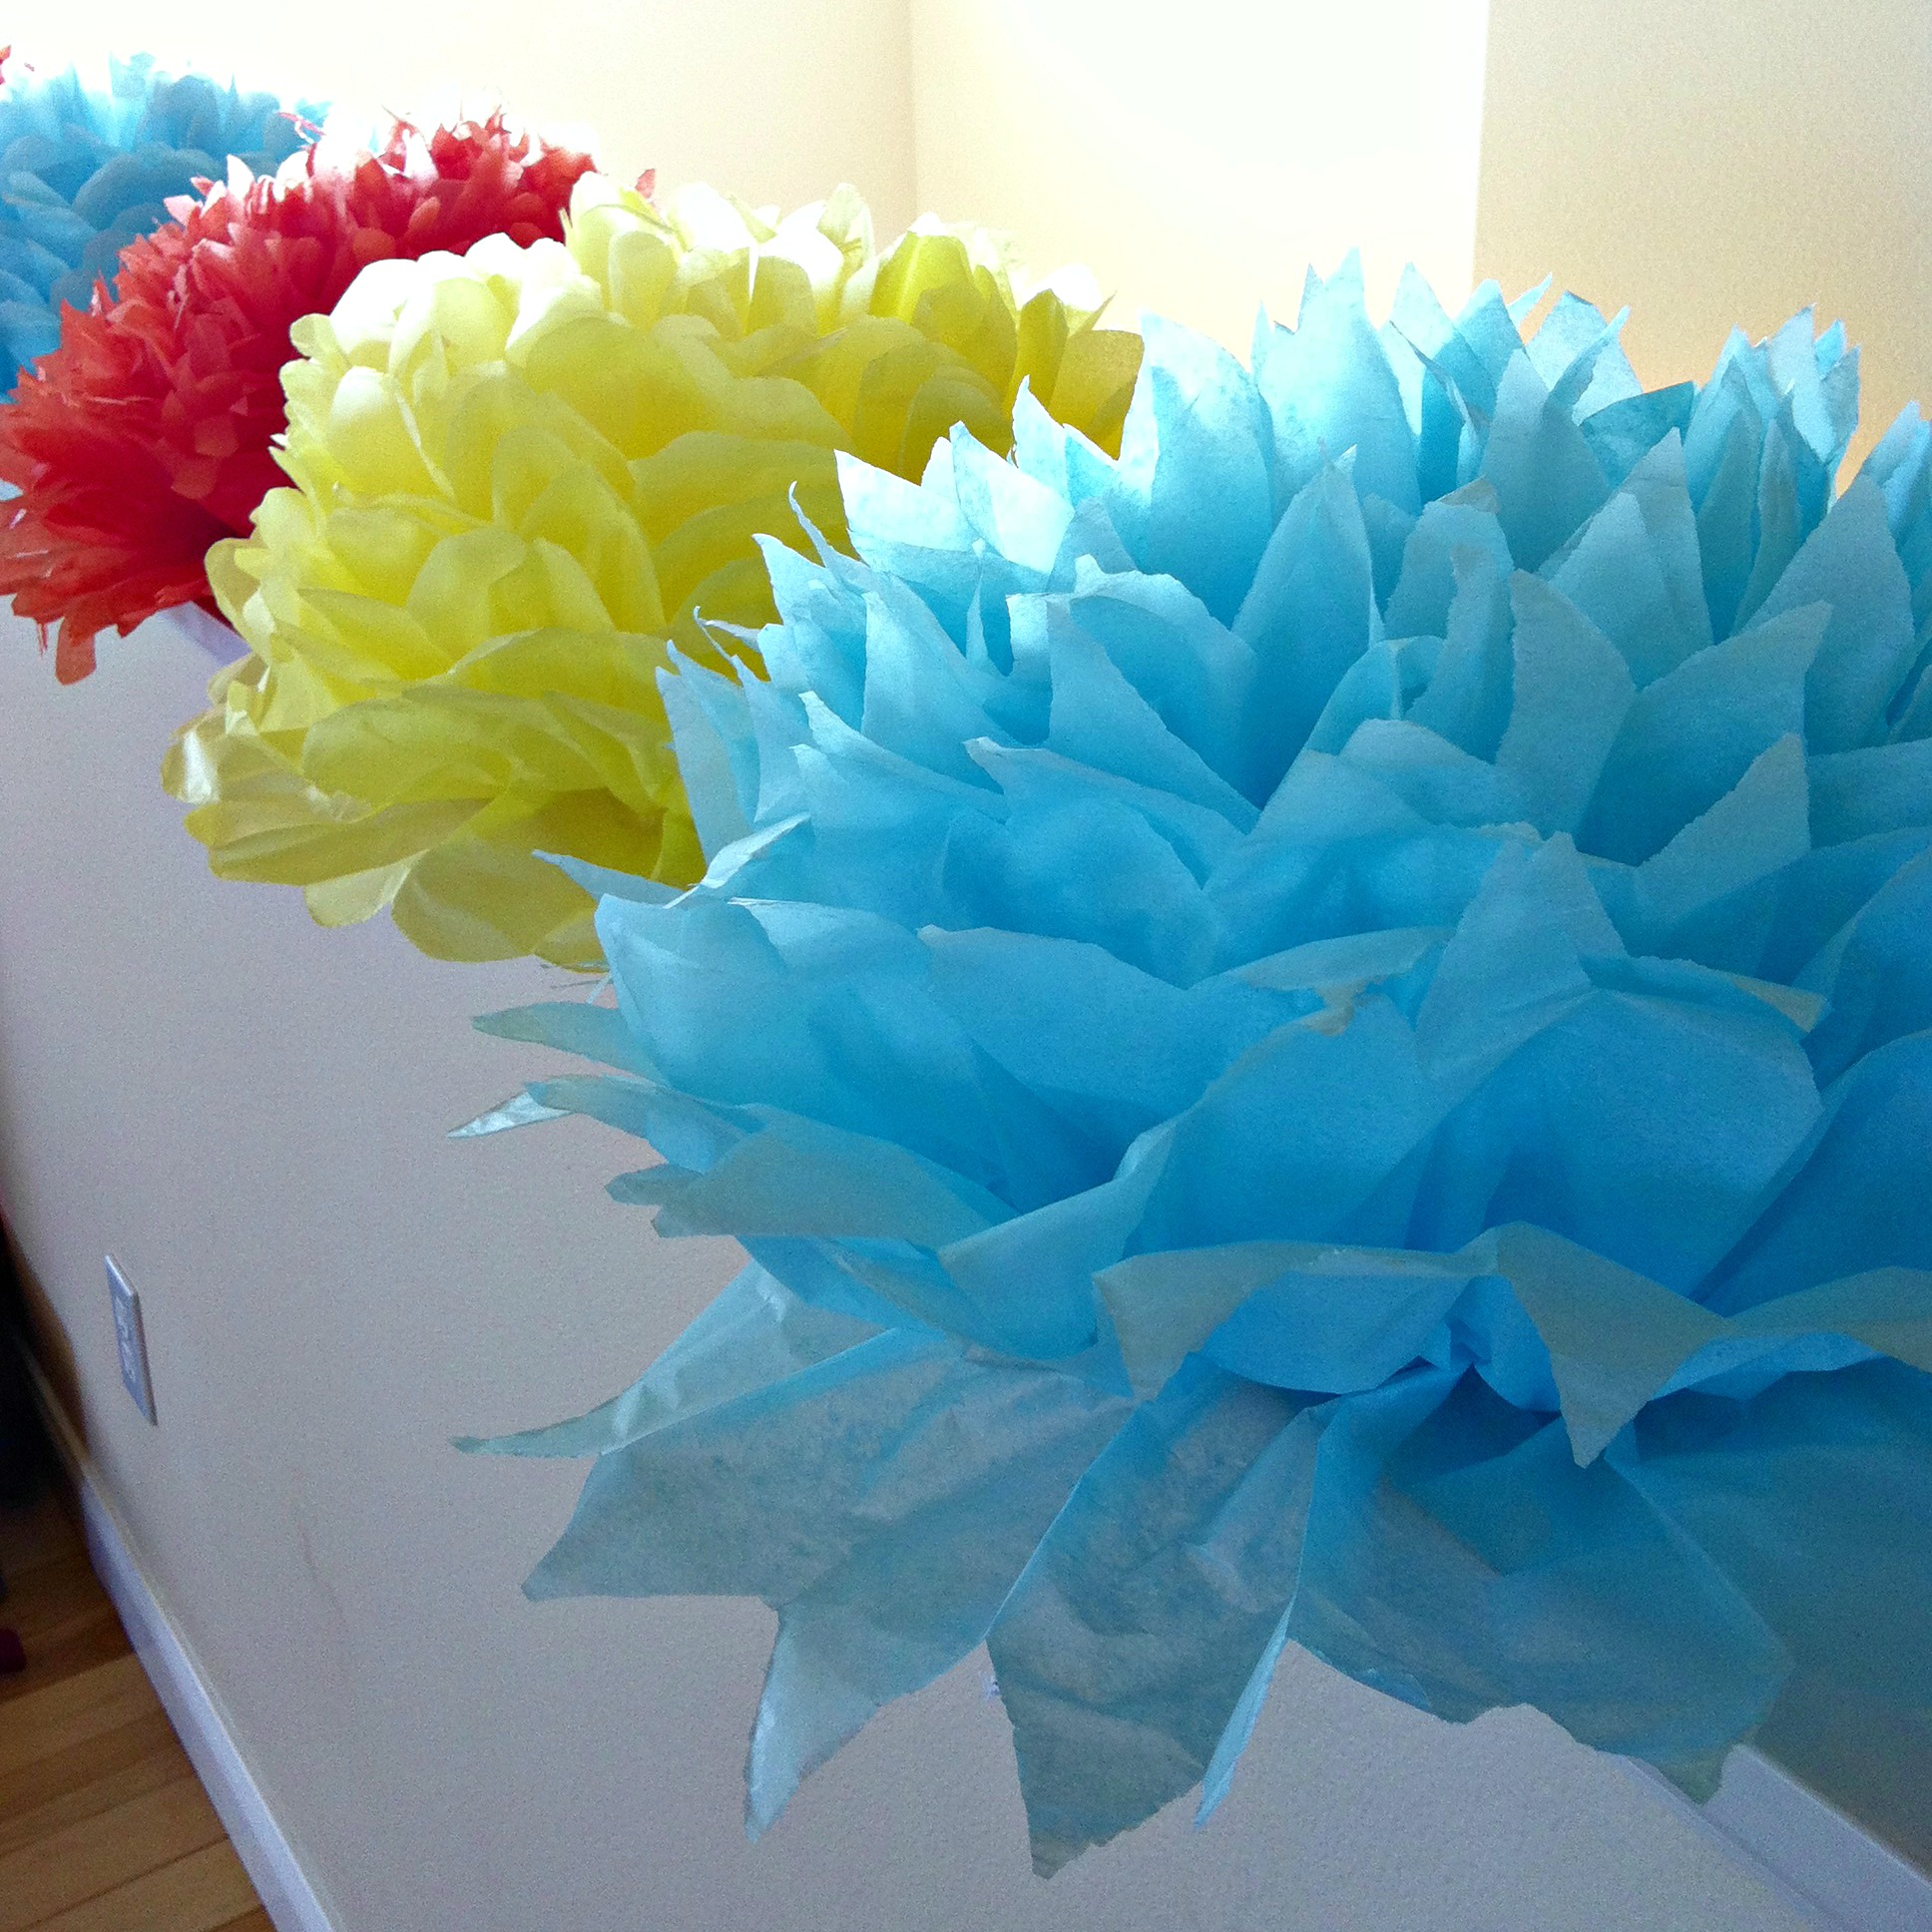 Diy giant handmade tissue paper flowers tutorial 2 for 1.00 make beautiful birthday party decorations final 2